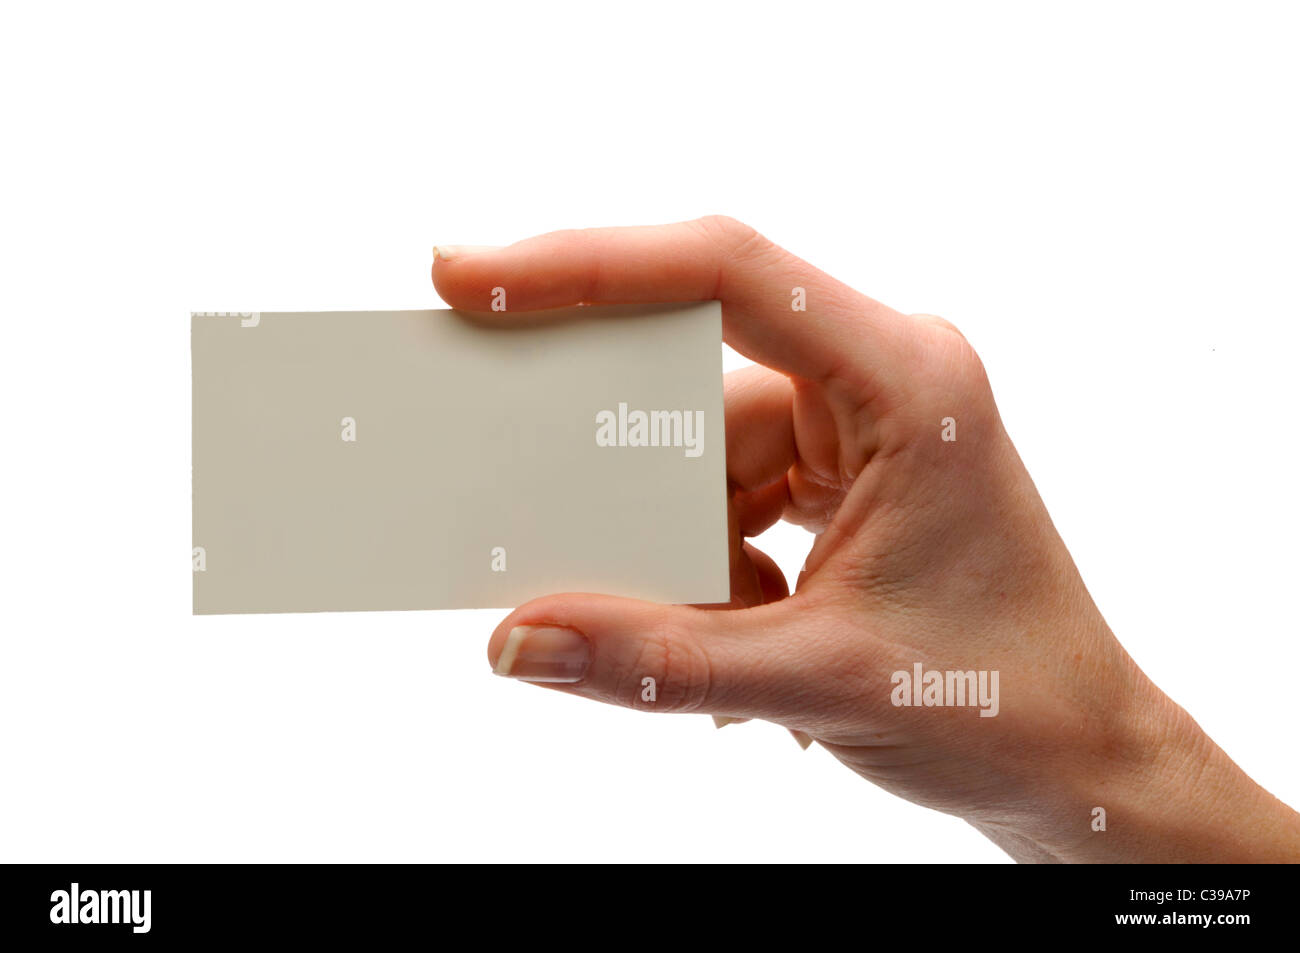 hand holding small blank business calling card Stock Photo